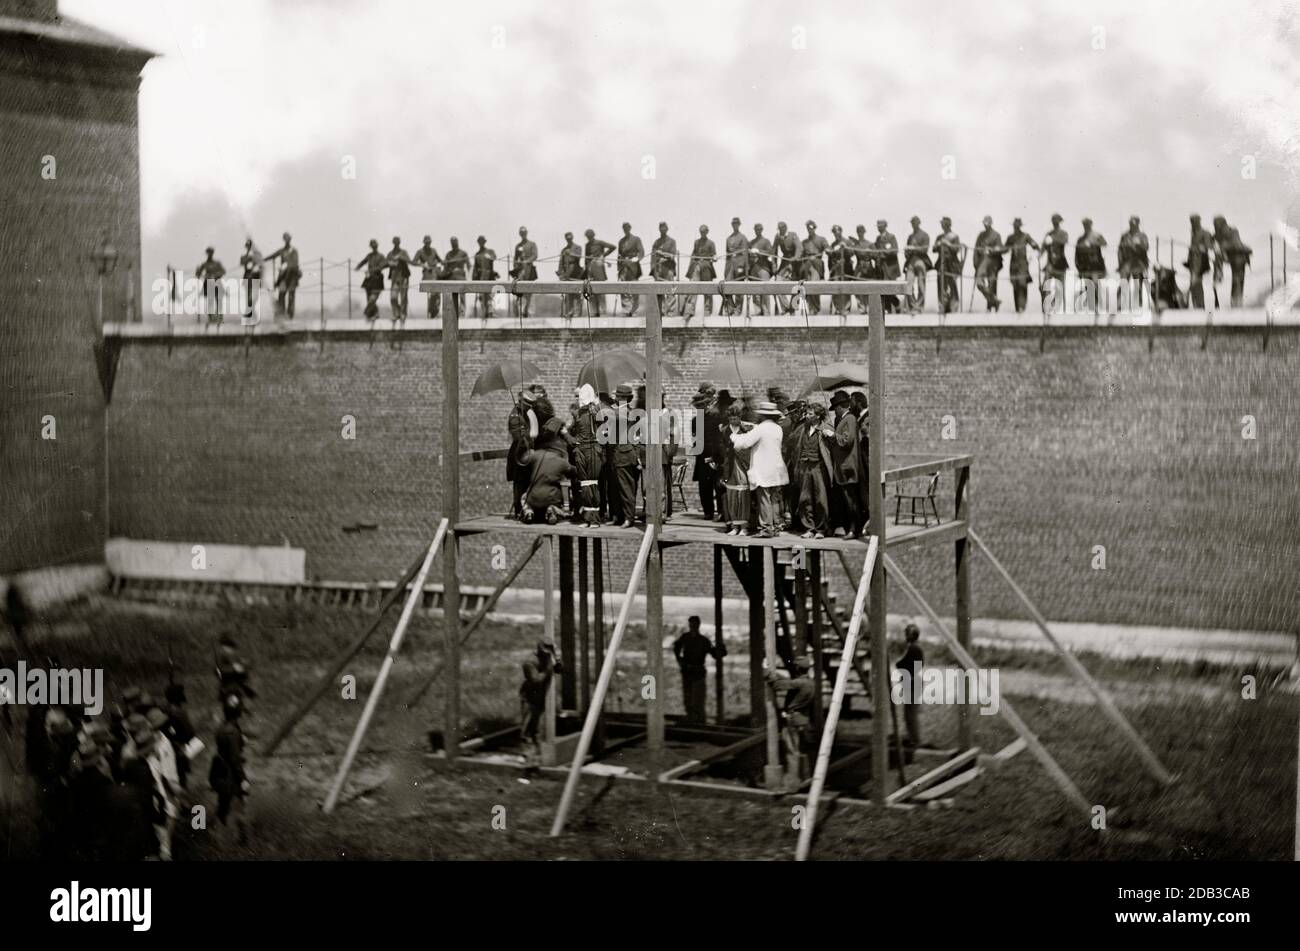 Washington, D.C. Adjusting the ropes for hanging the conspirators. Stock Photo